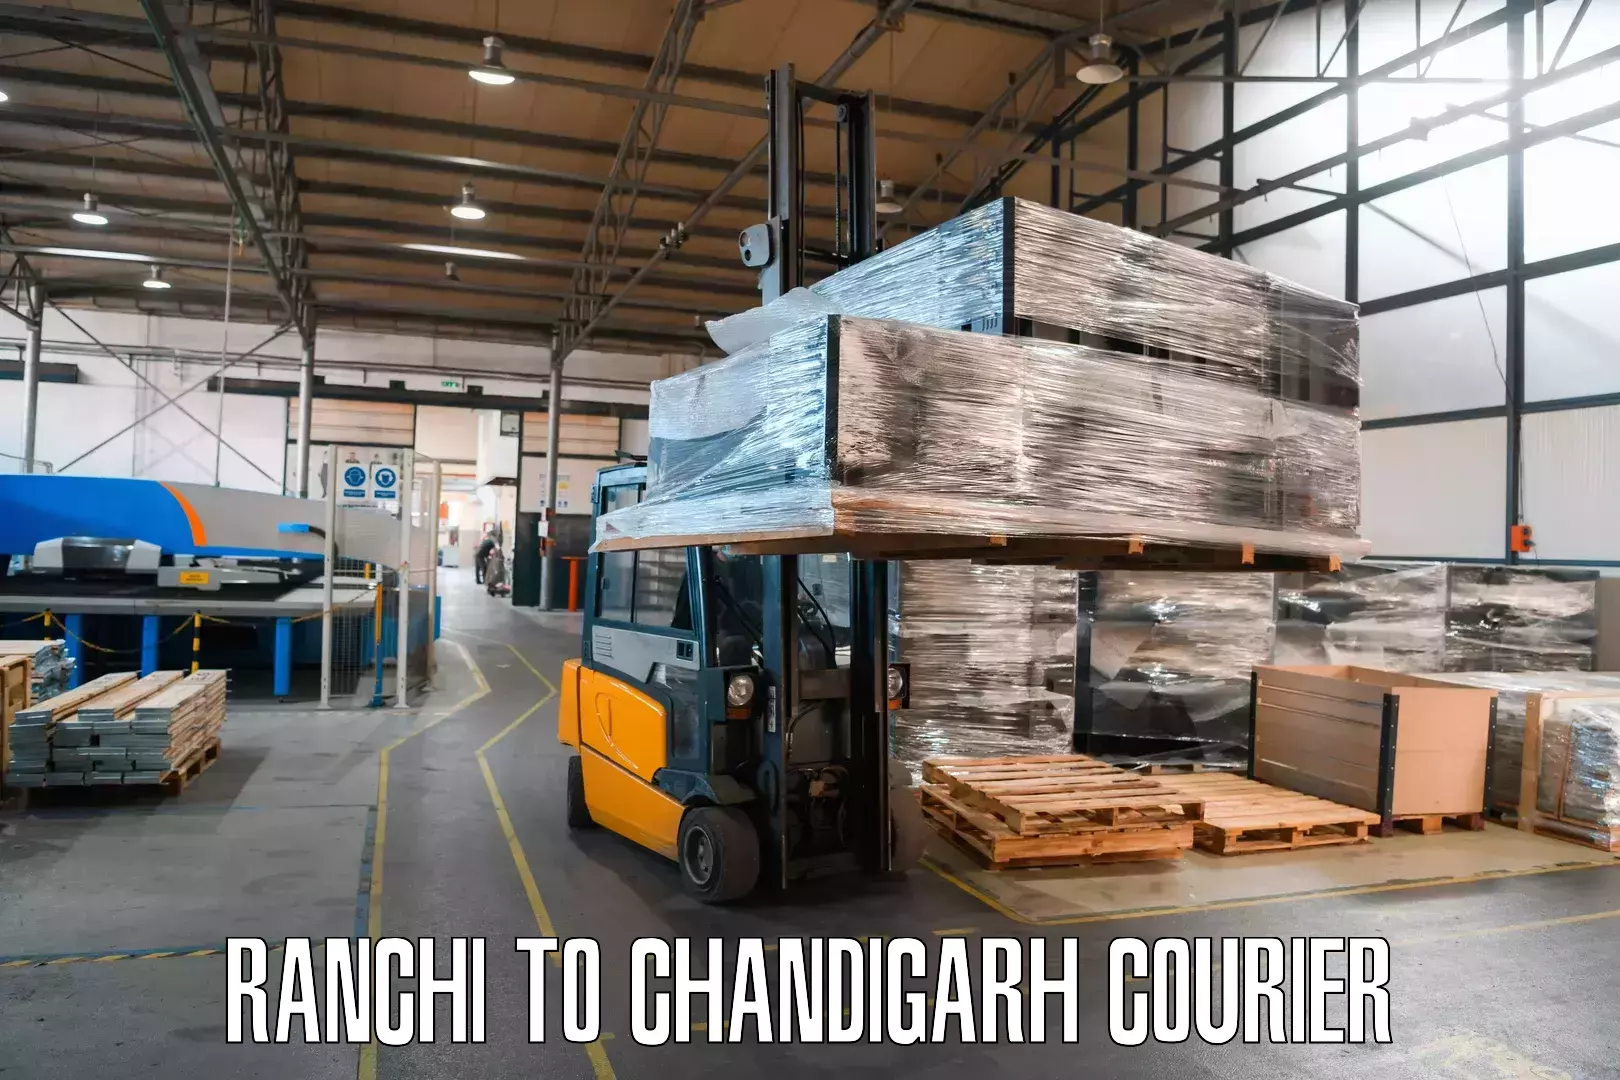 Cash on delivery service Ranchi to Chandigarh